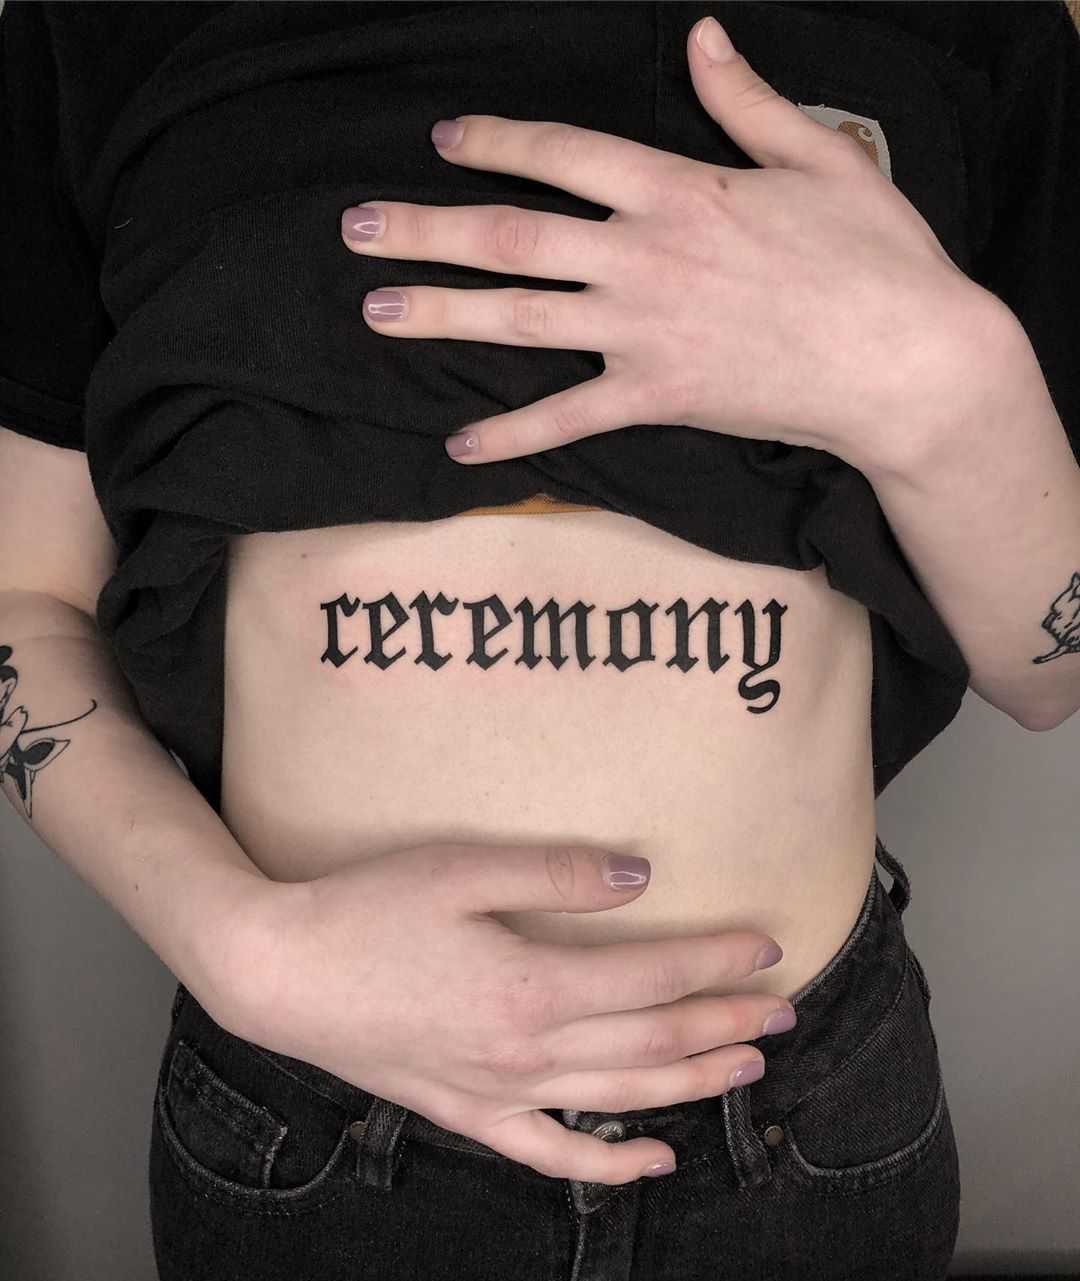 Ceremony tattoo by Tine DeFiore